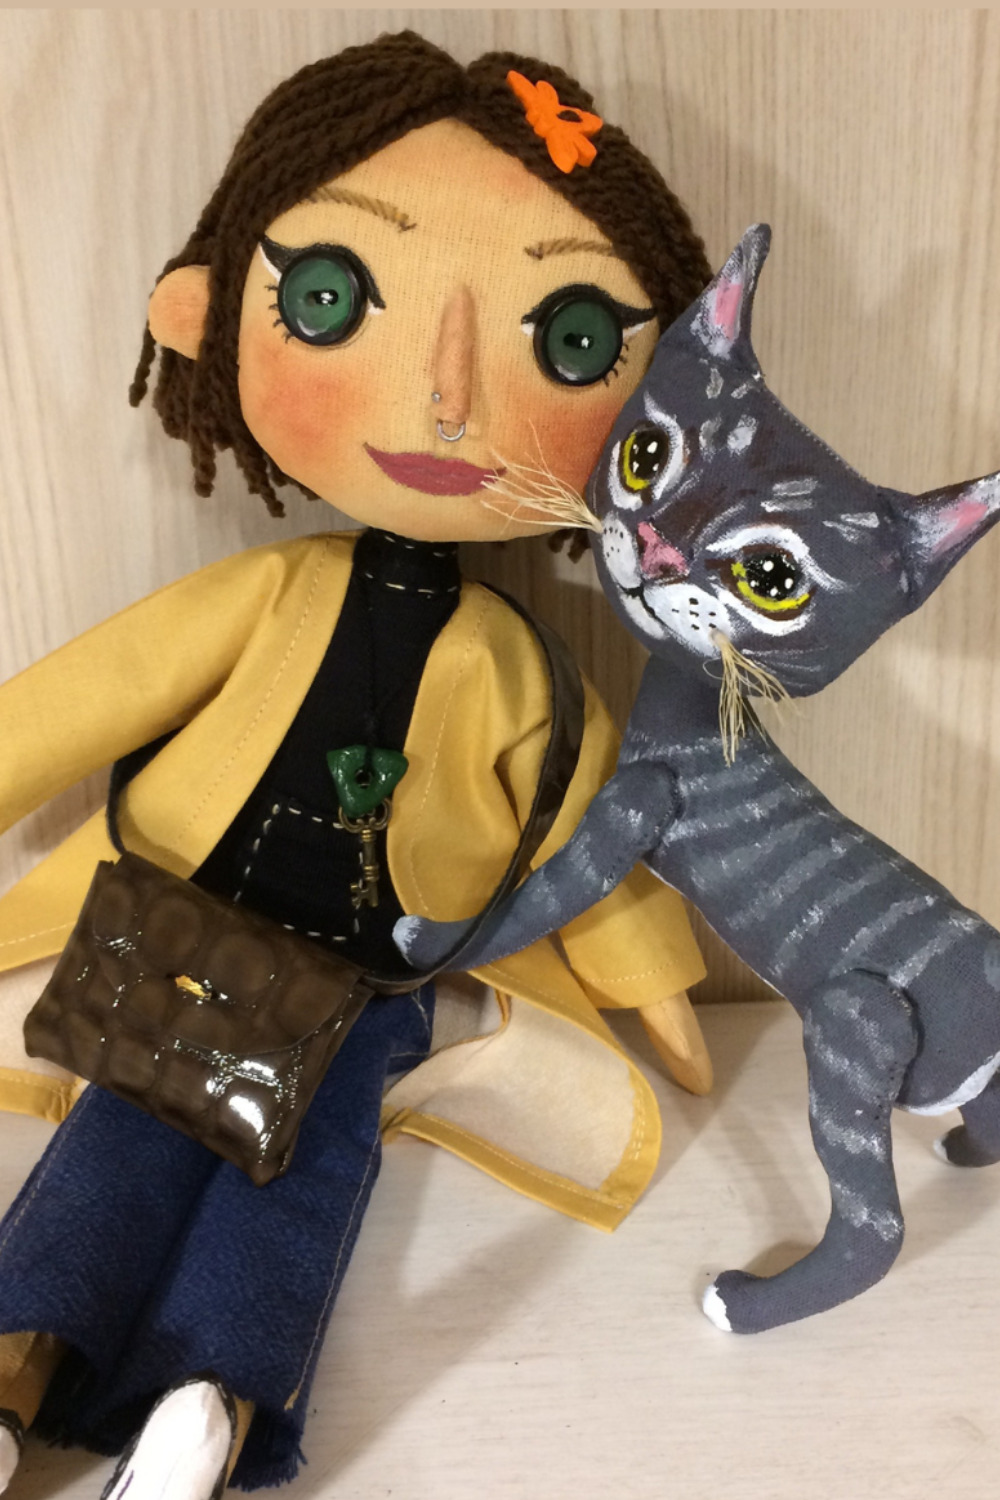 10 Images Of My New Ooak Art Dolls In The Coraline Style